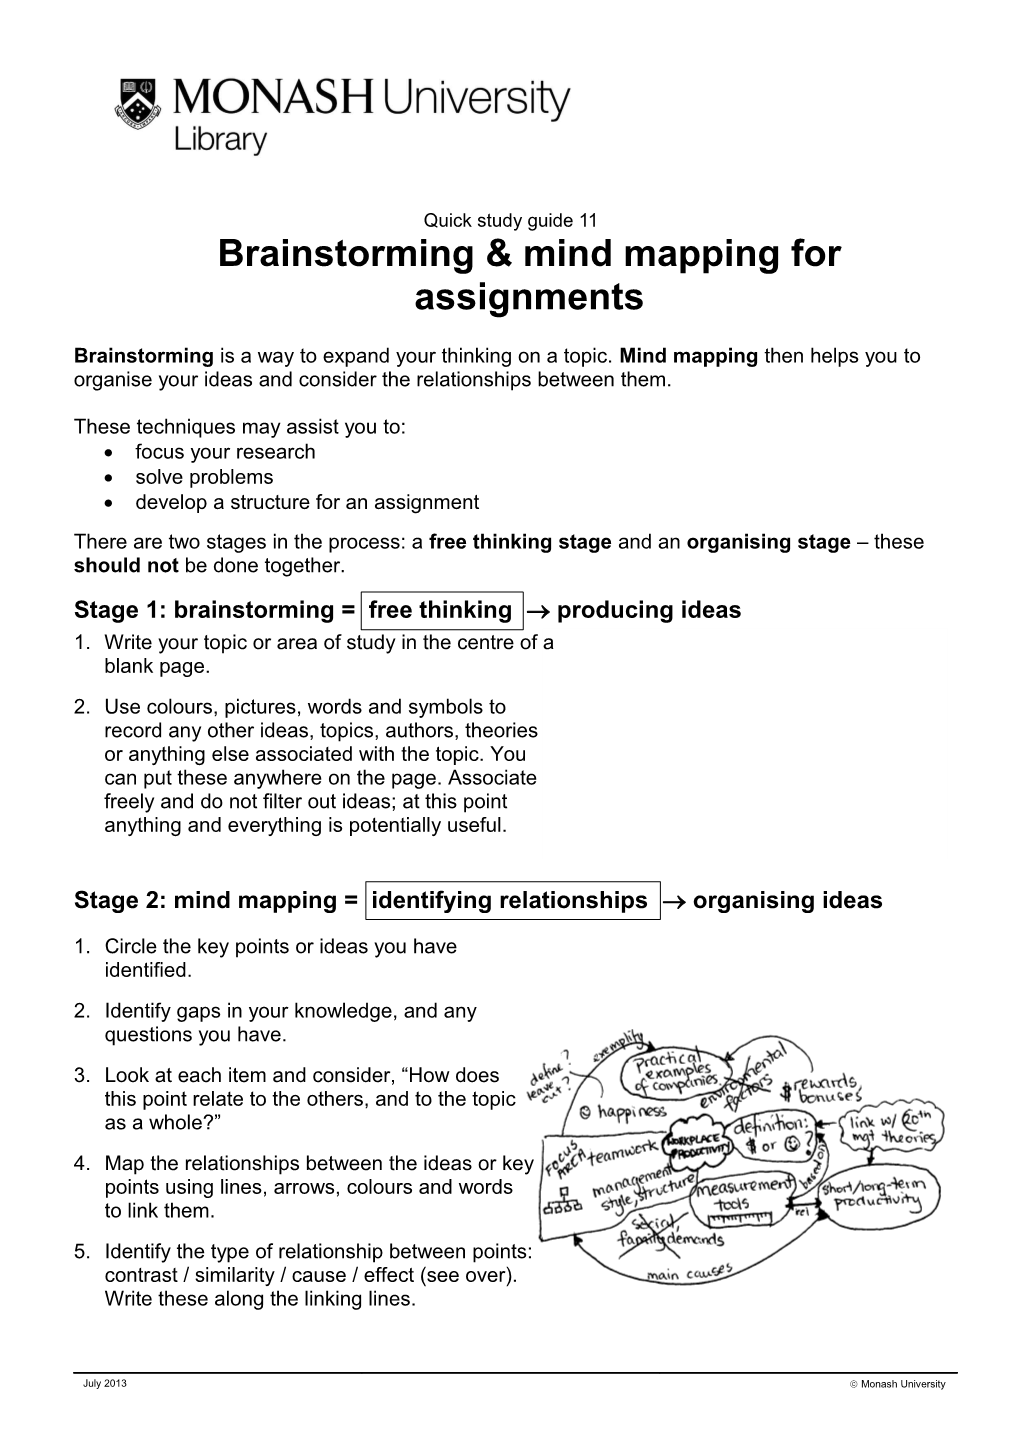 Brainstorming & Mind Mapping for Assignments